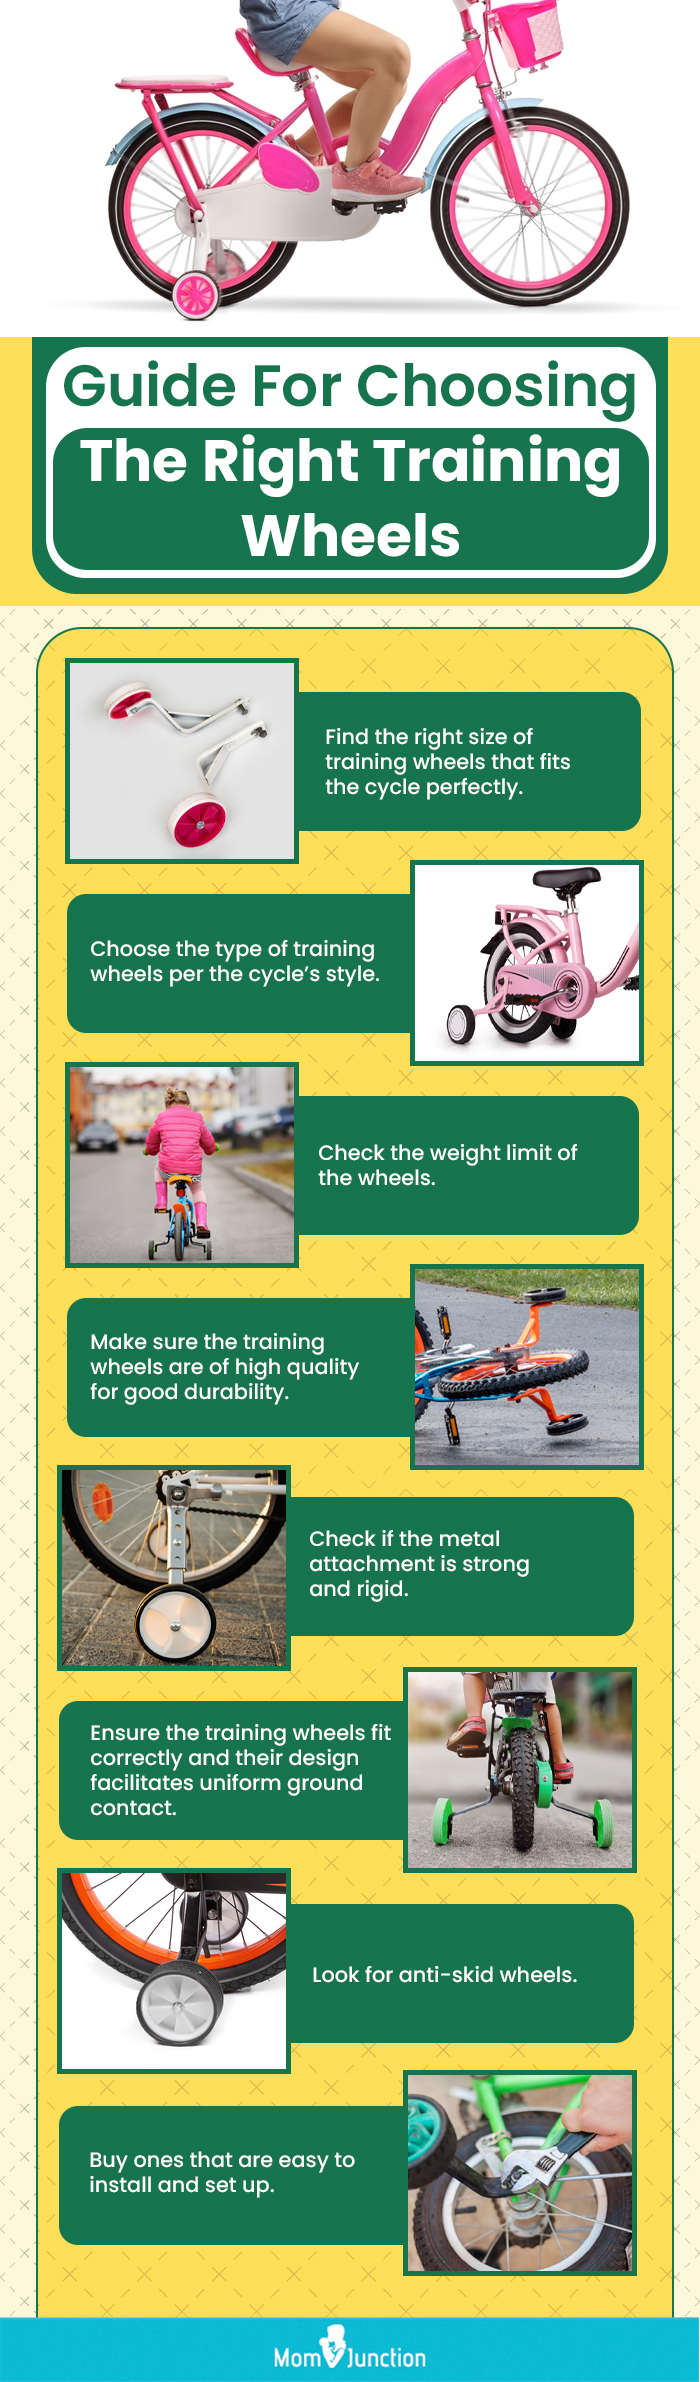 Guide For Choosing The Right Training Wheels (infographic)